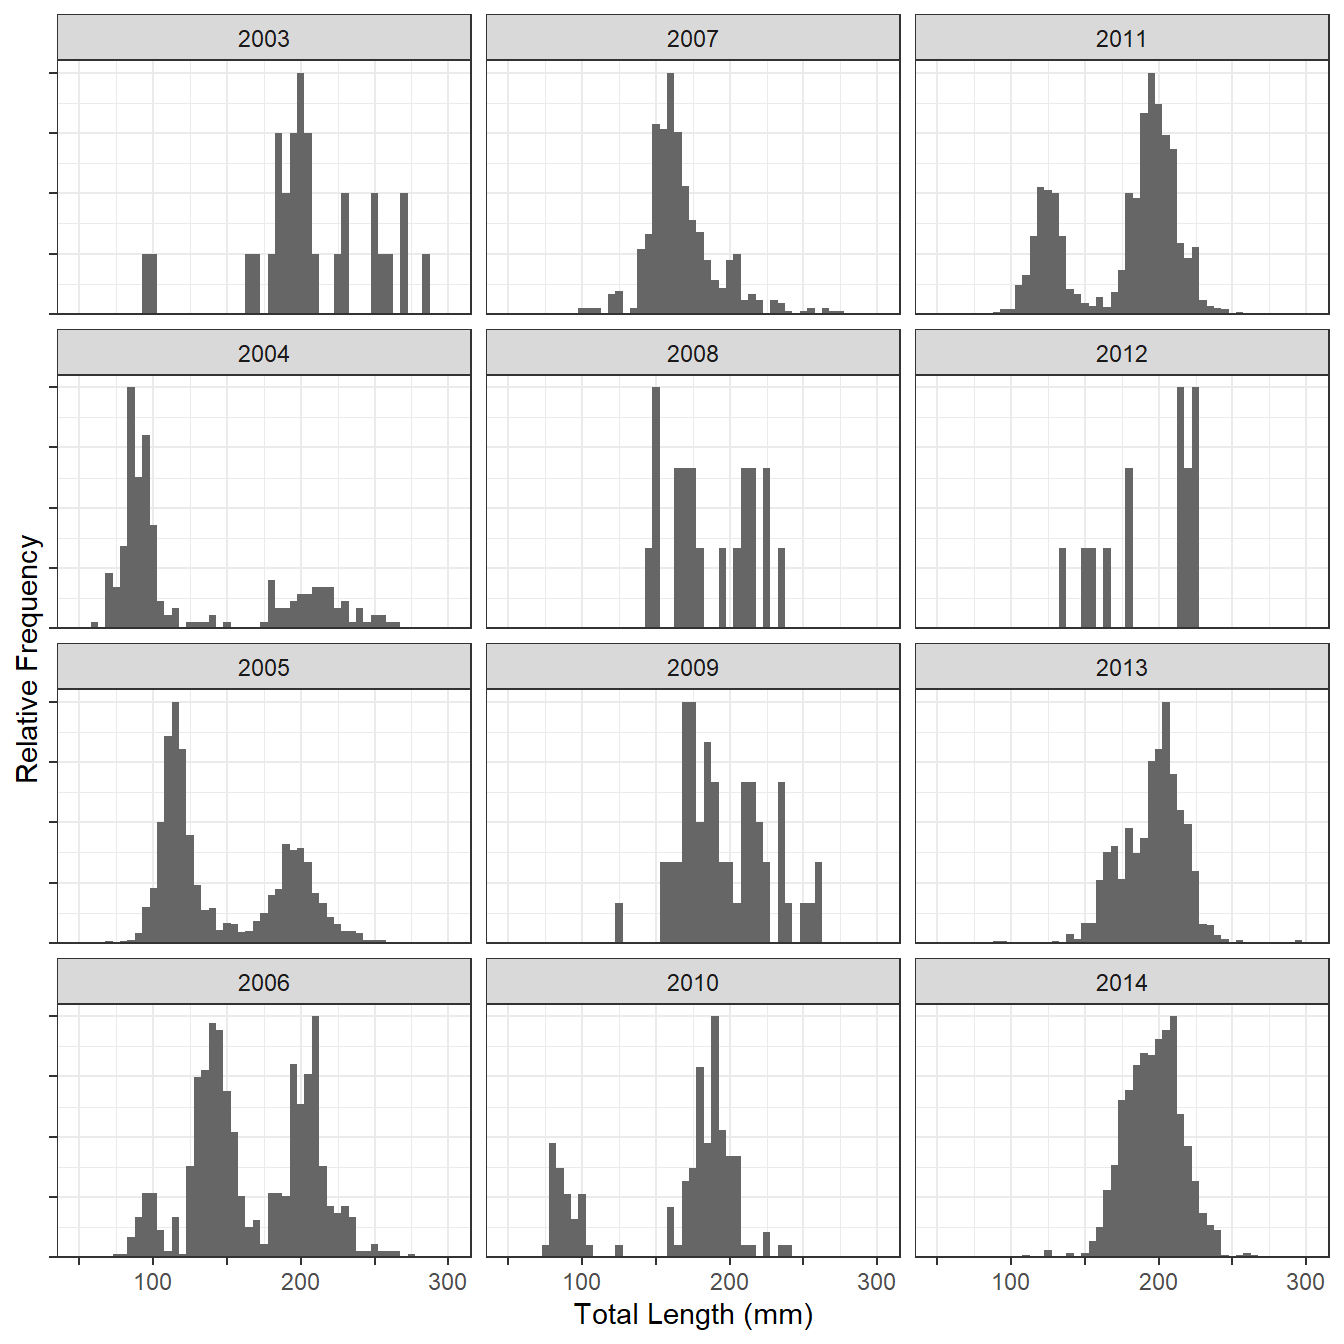 Histograms of the total lengths of Lake Superior Kiyi from 2003 to 2014.